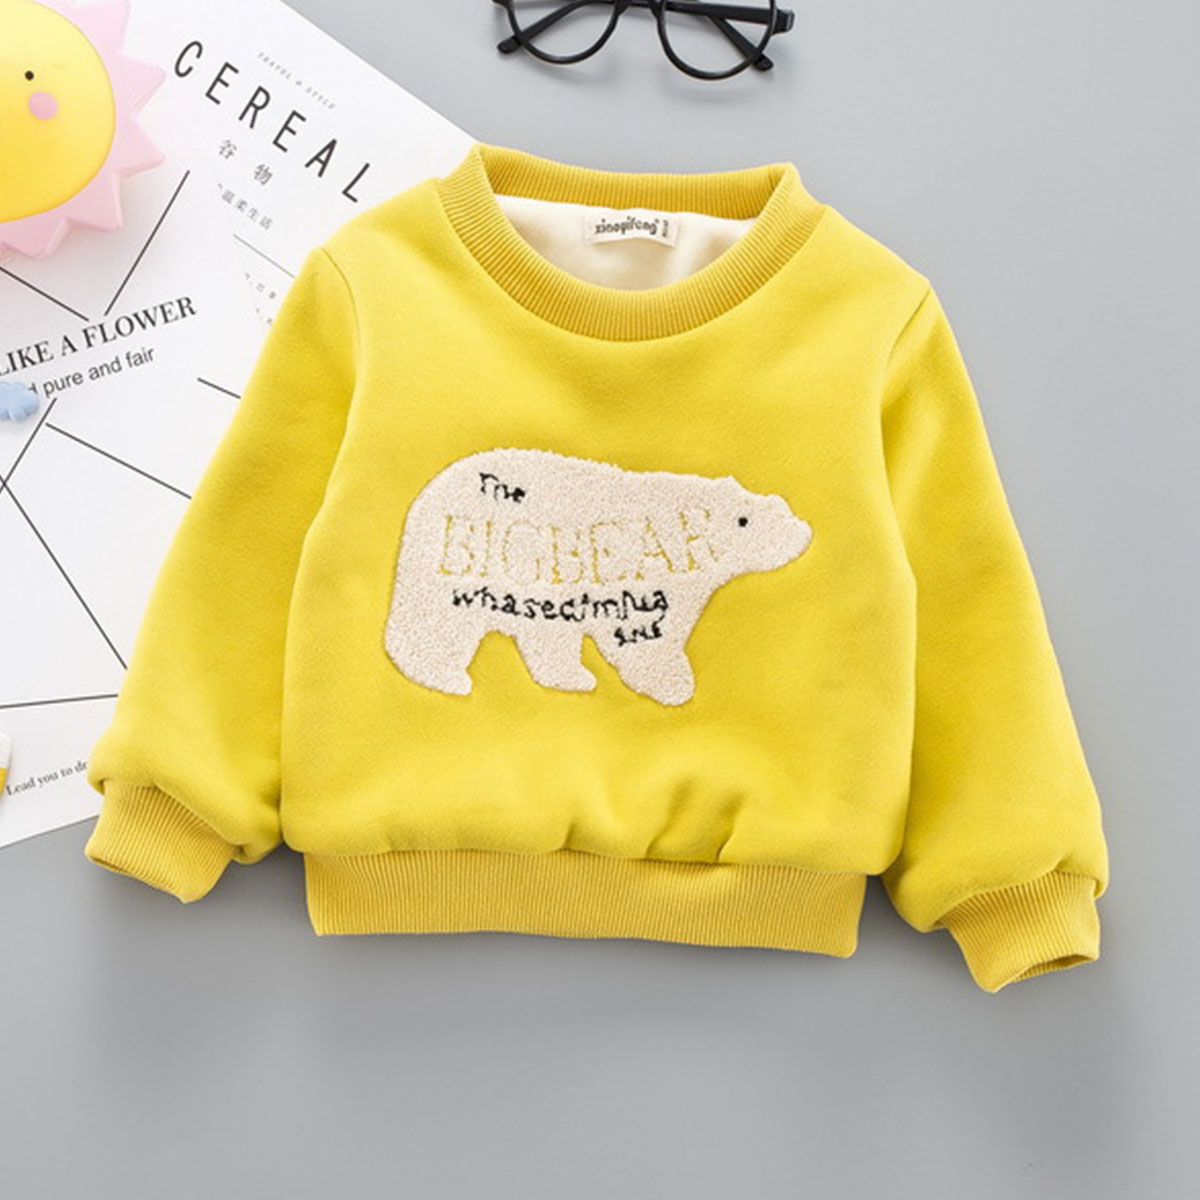 Baby / Toddler Stylish Letter and Bear Applique Sweater